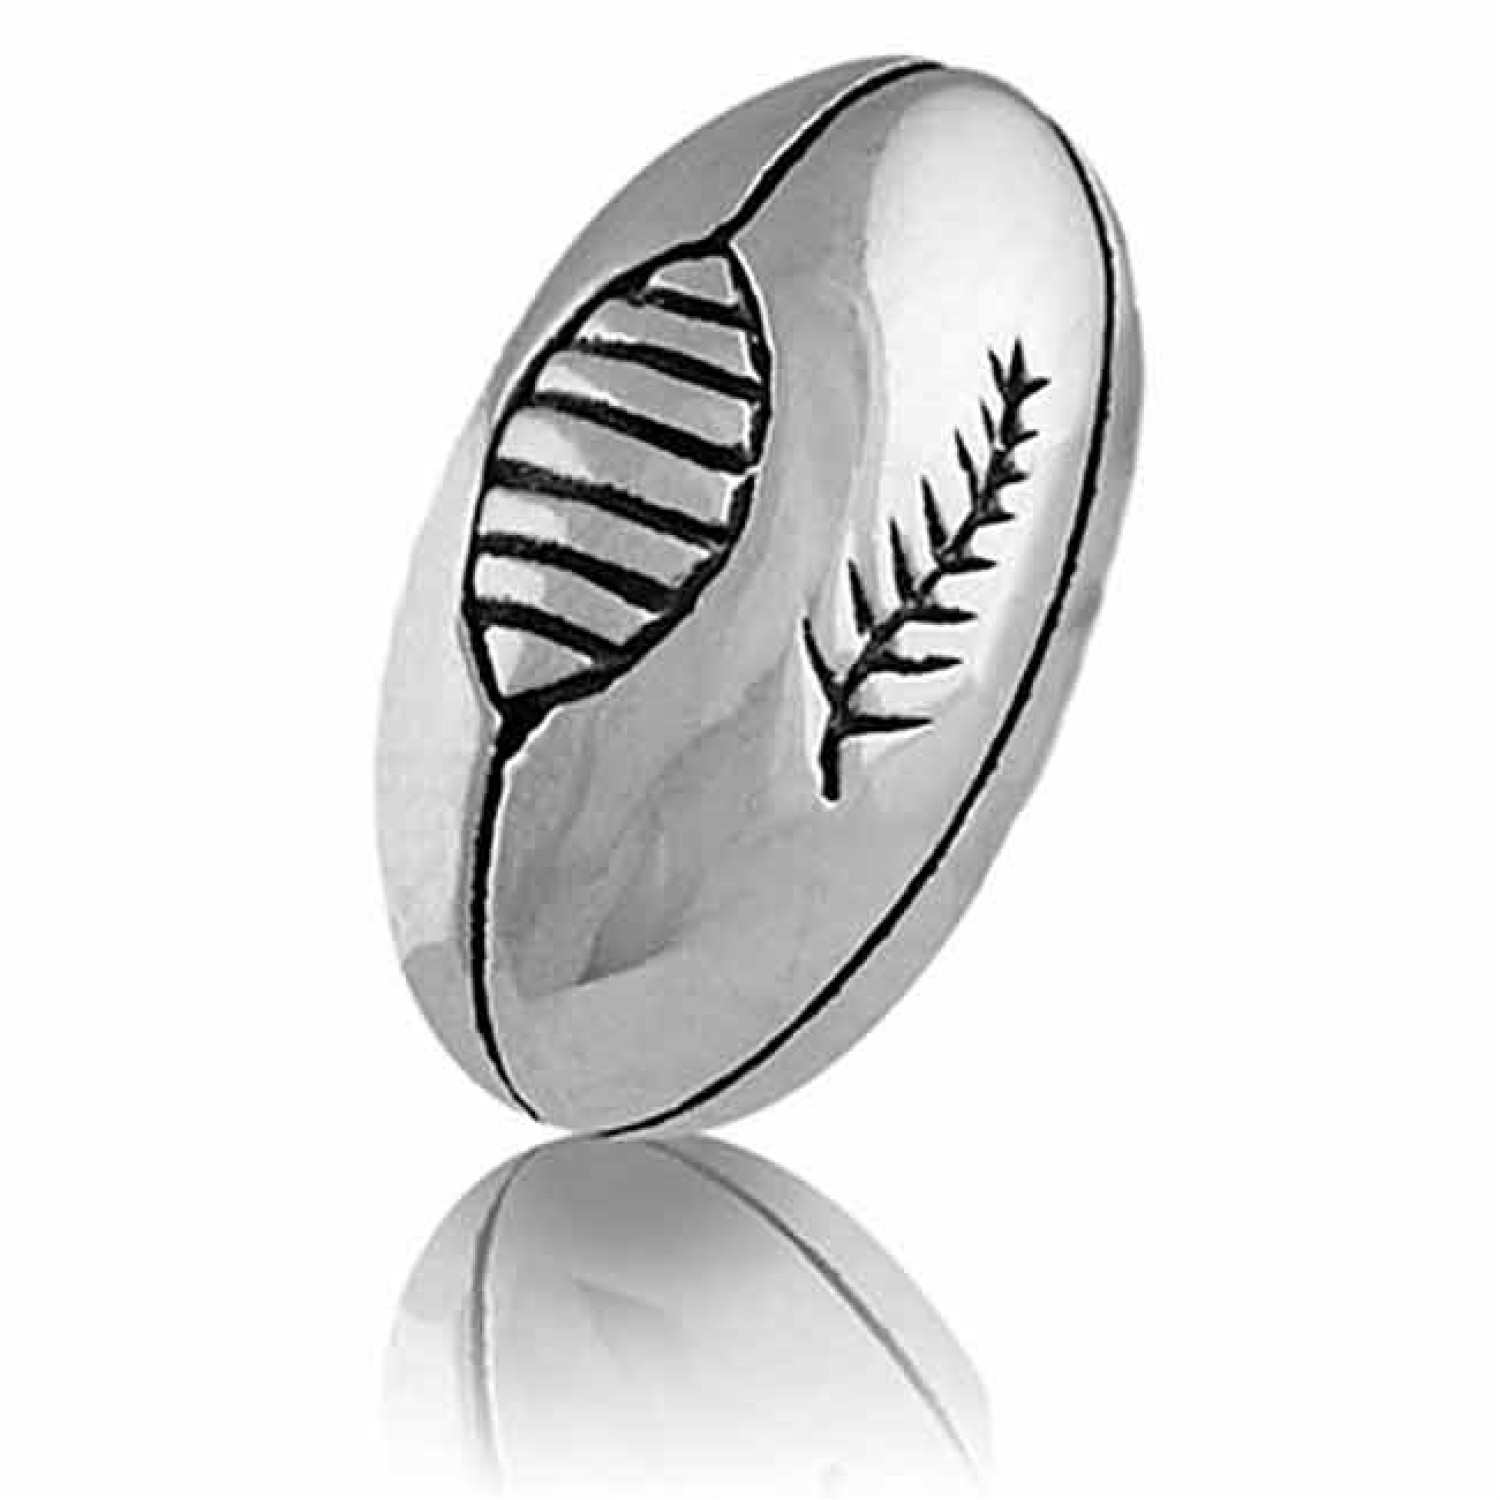 LK046 Evolve Charms NZ Rugby Ball - Go the All Blacks. Evolve Charm Jewellery NZ Rugby Ball - Go the All Blacks Go the All Blacks New Zealands National Sports Sterling Silver Christies exclusive 5 year guarantee compatible with all other major brands Brac